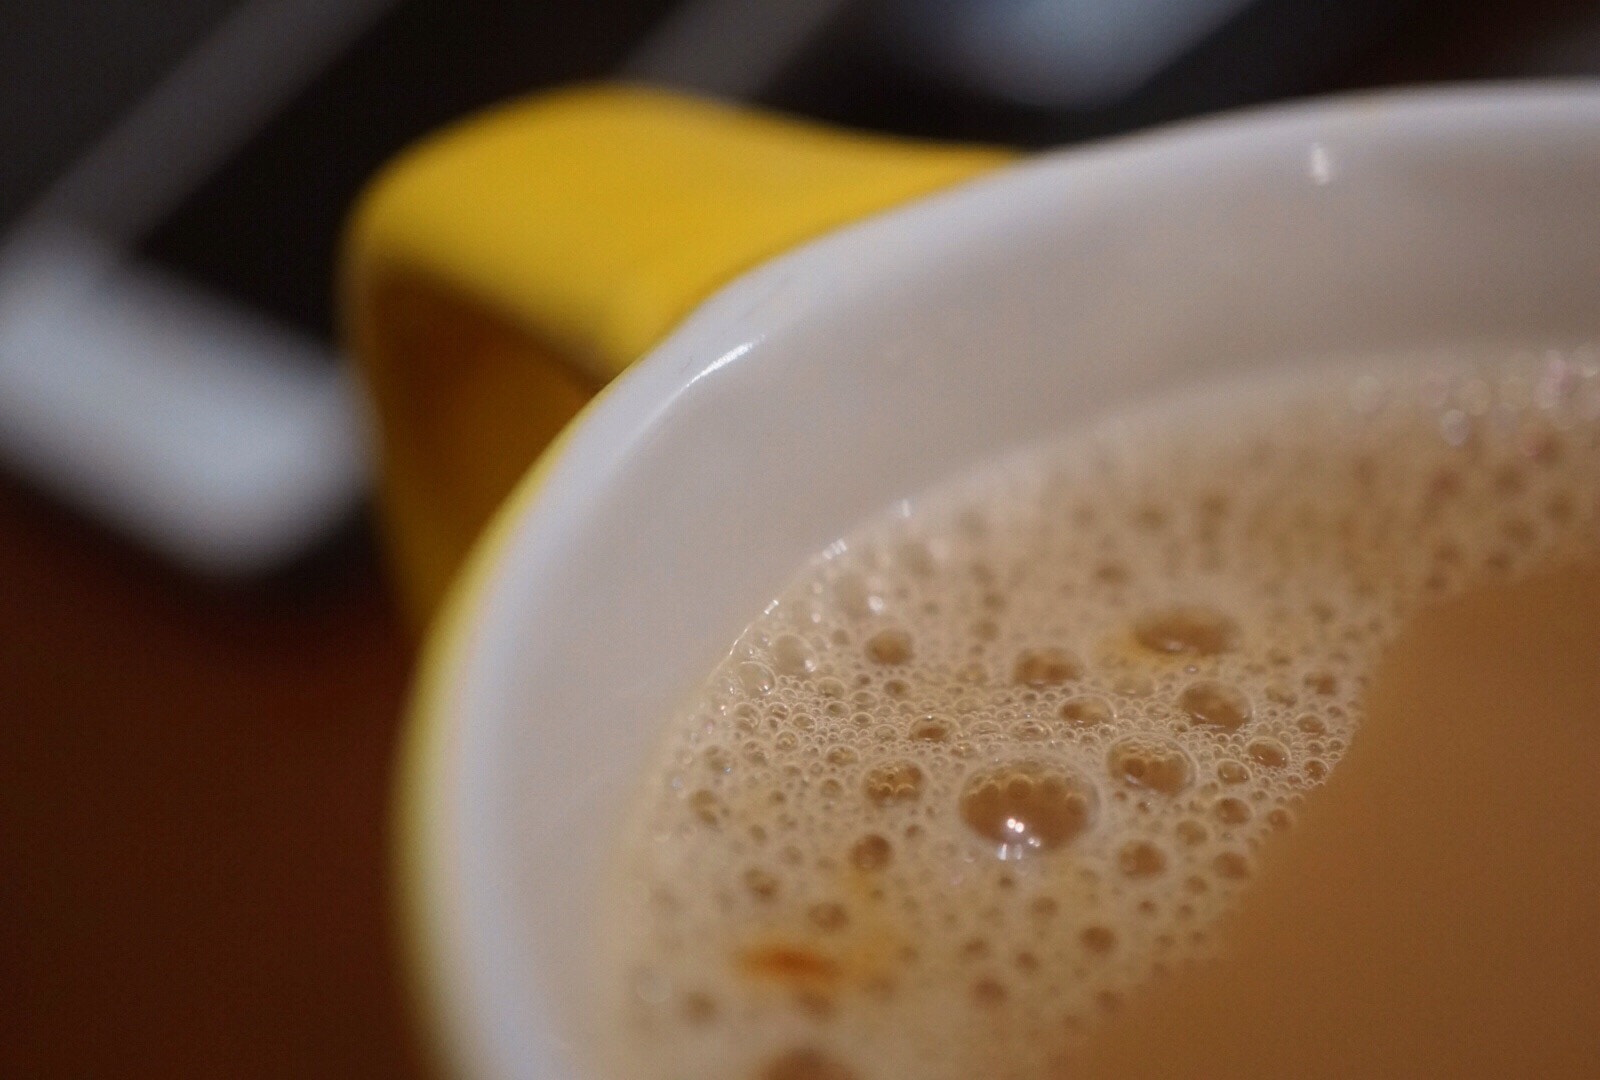 Sony a5100 sample photo. At night, drink a cup of coffee, see if they might photography